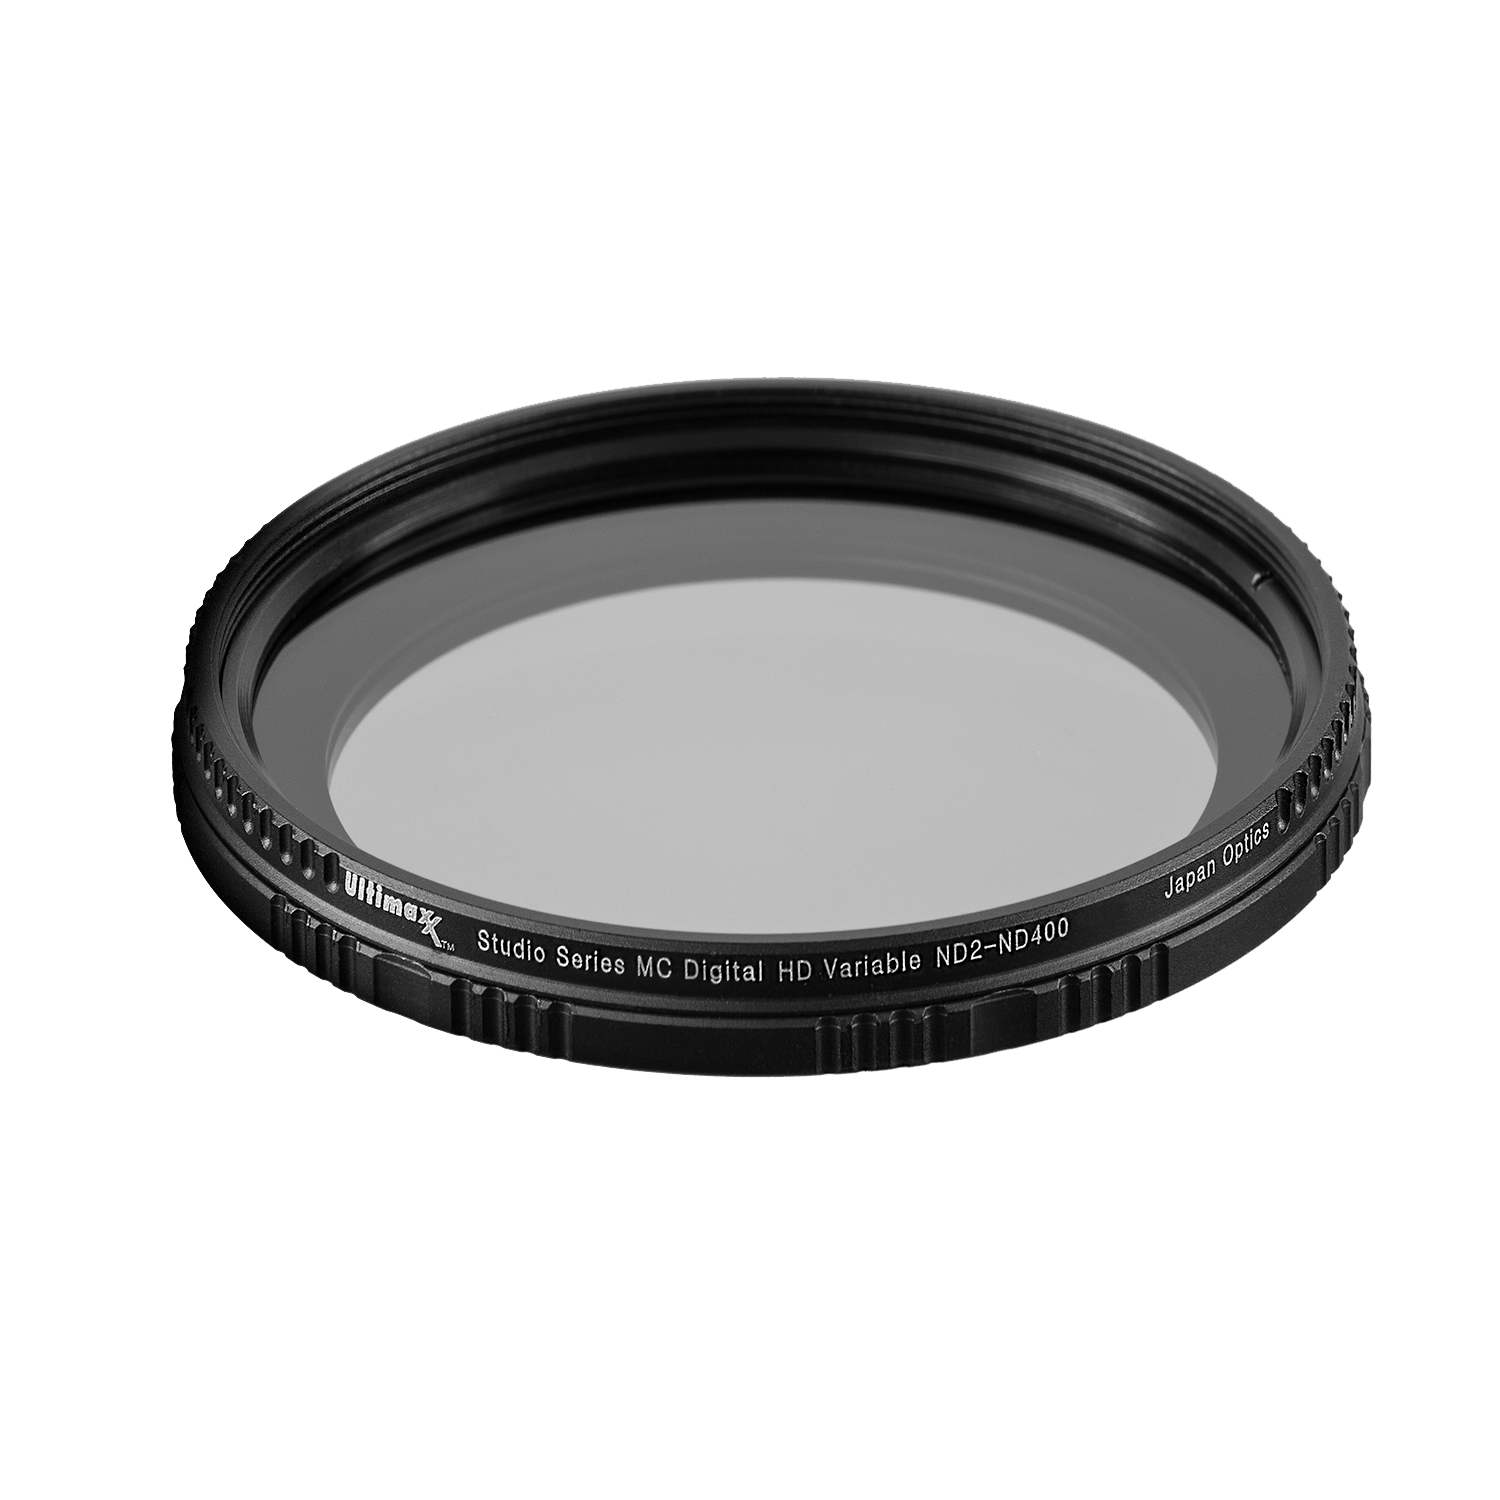 Ultimaxx 46mm VARIABLE NEUTRAL DENSITY FILTER ND2-ND400